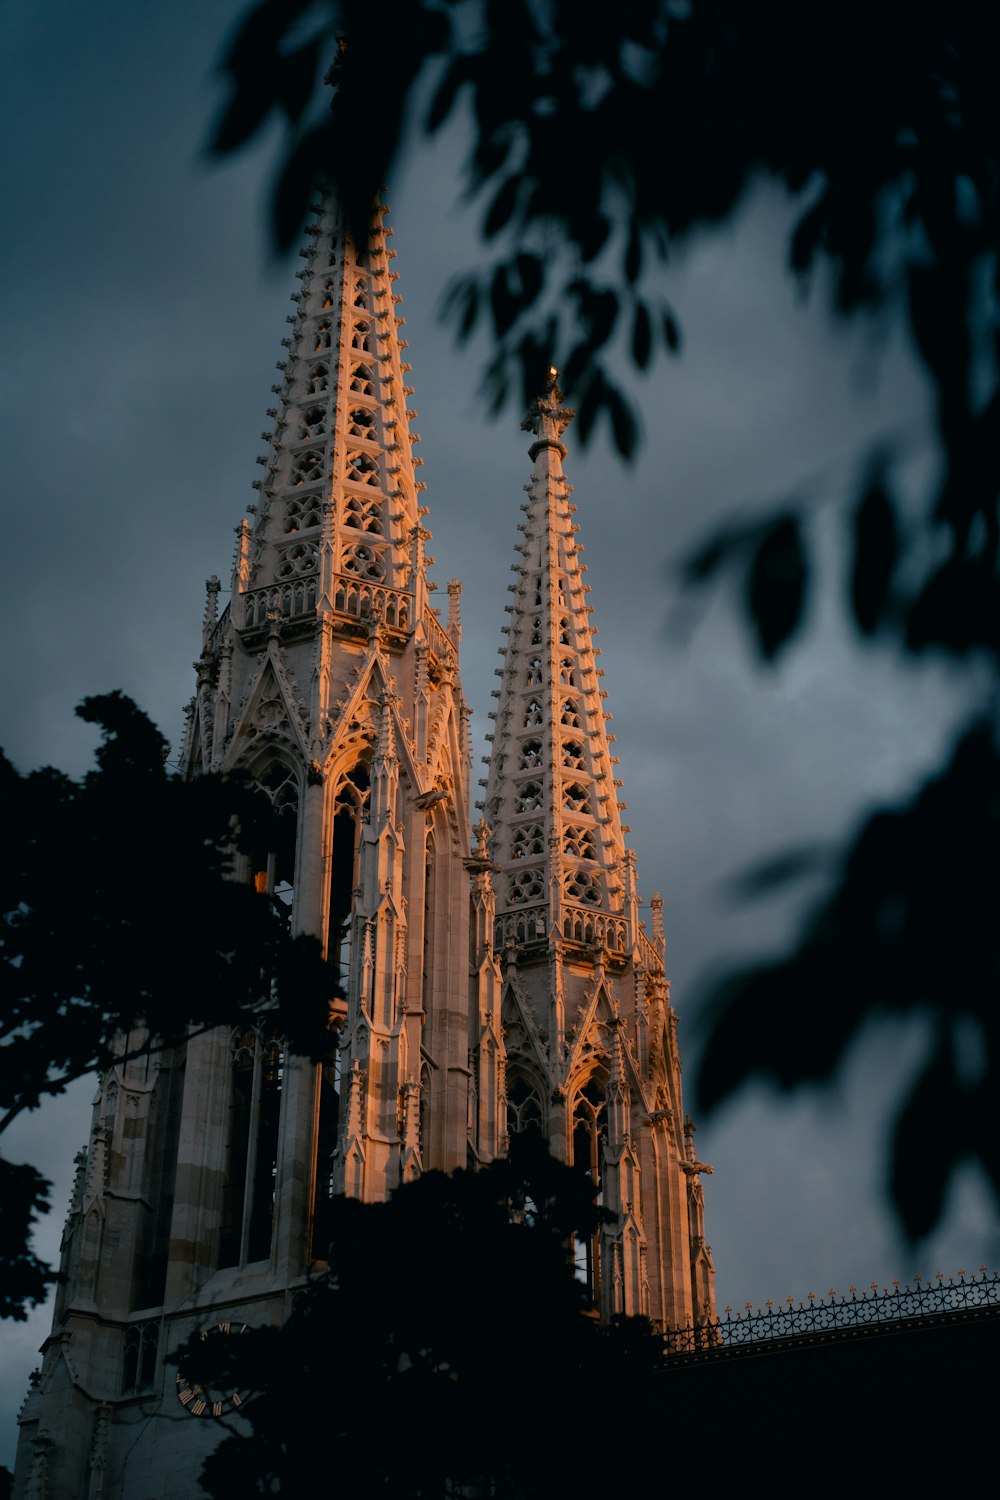 a large cathedral with many spires lit up at night